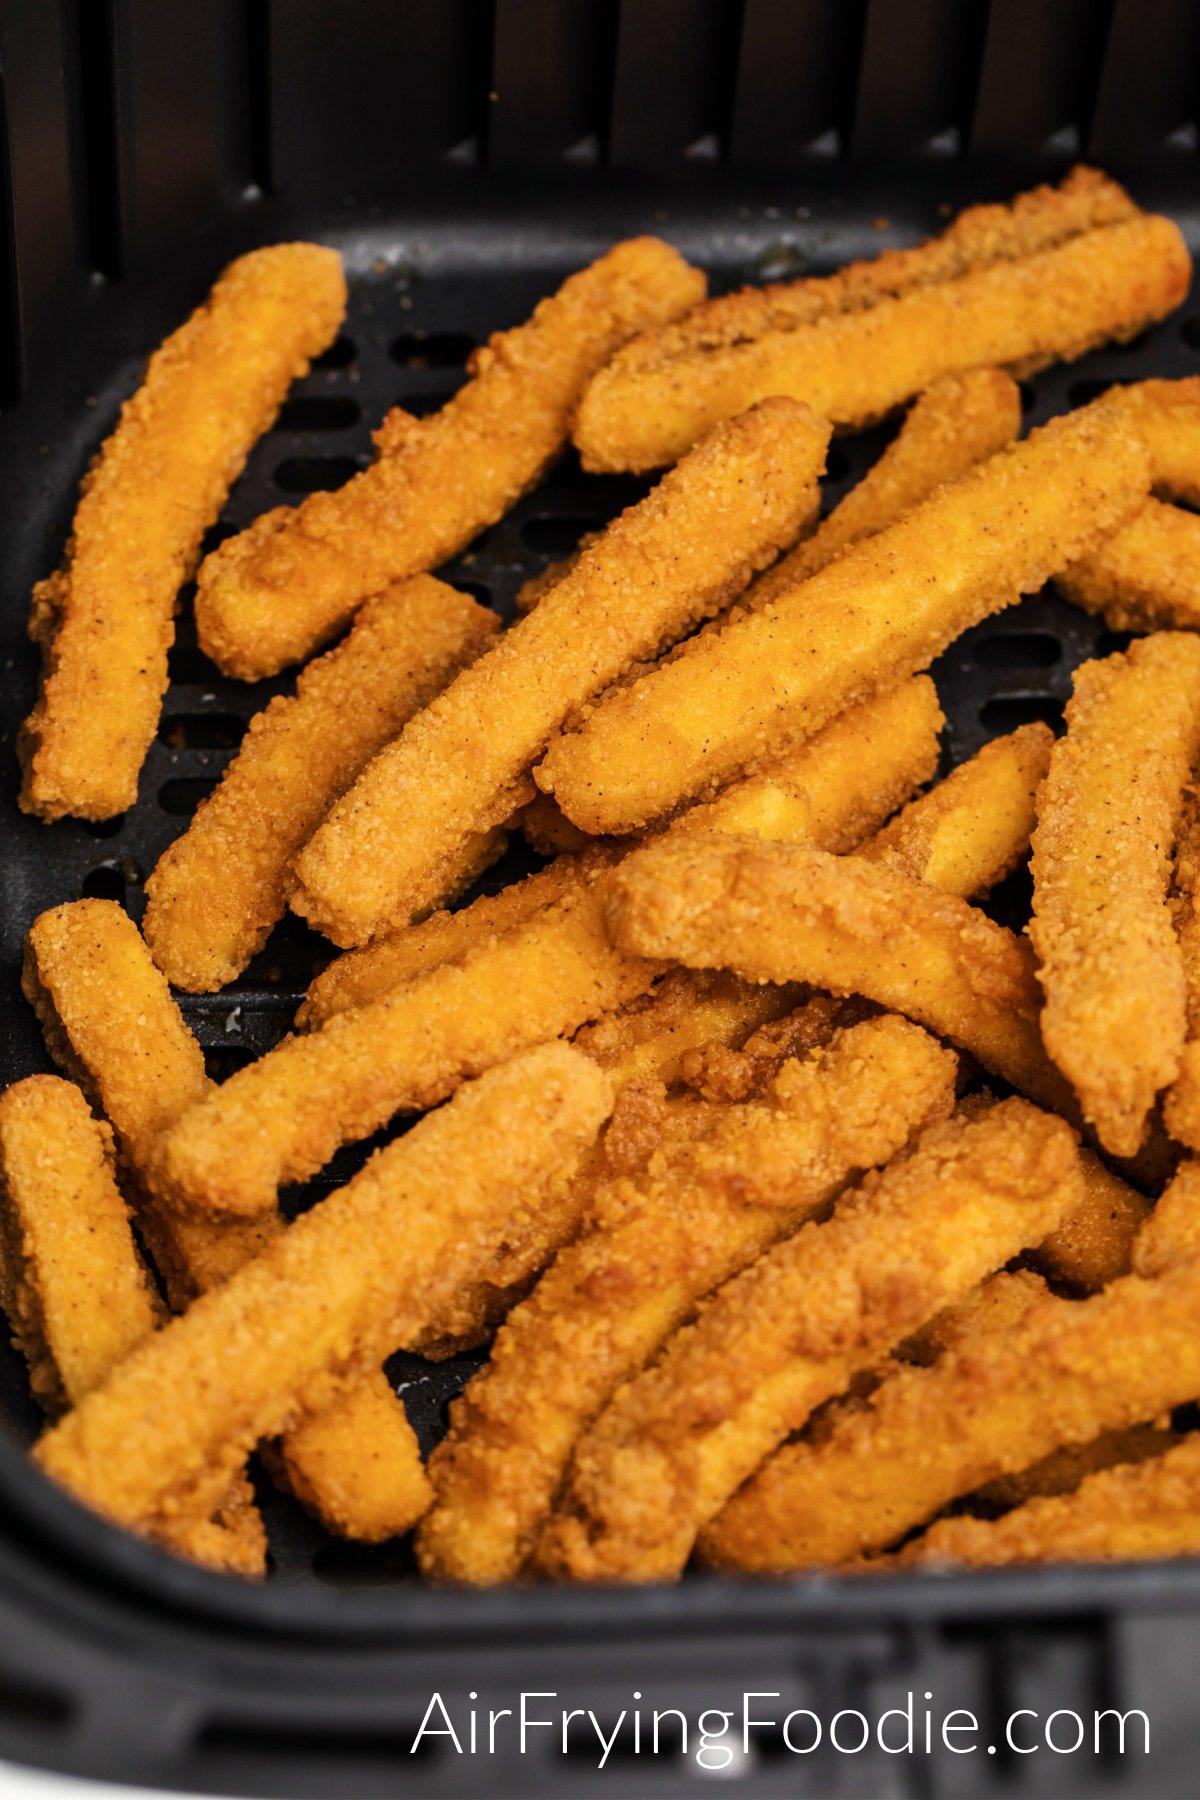 Fully cooked chicken fries in air fryer basket.